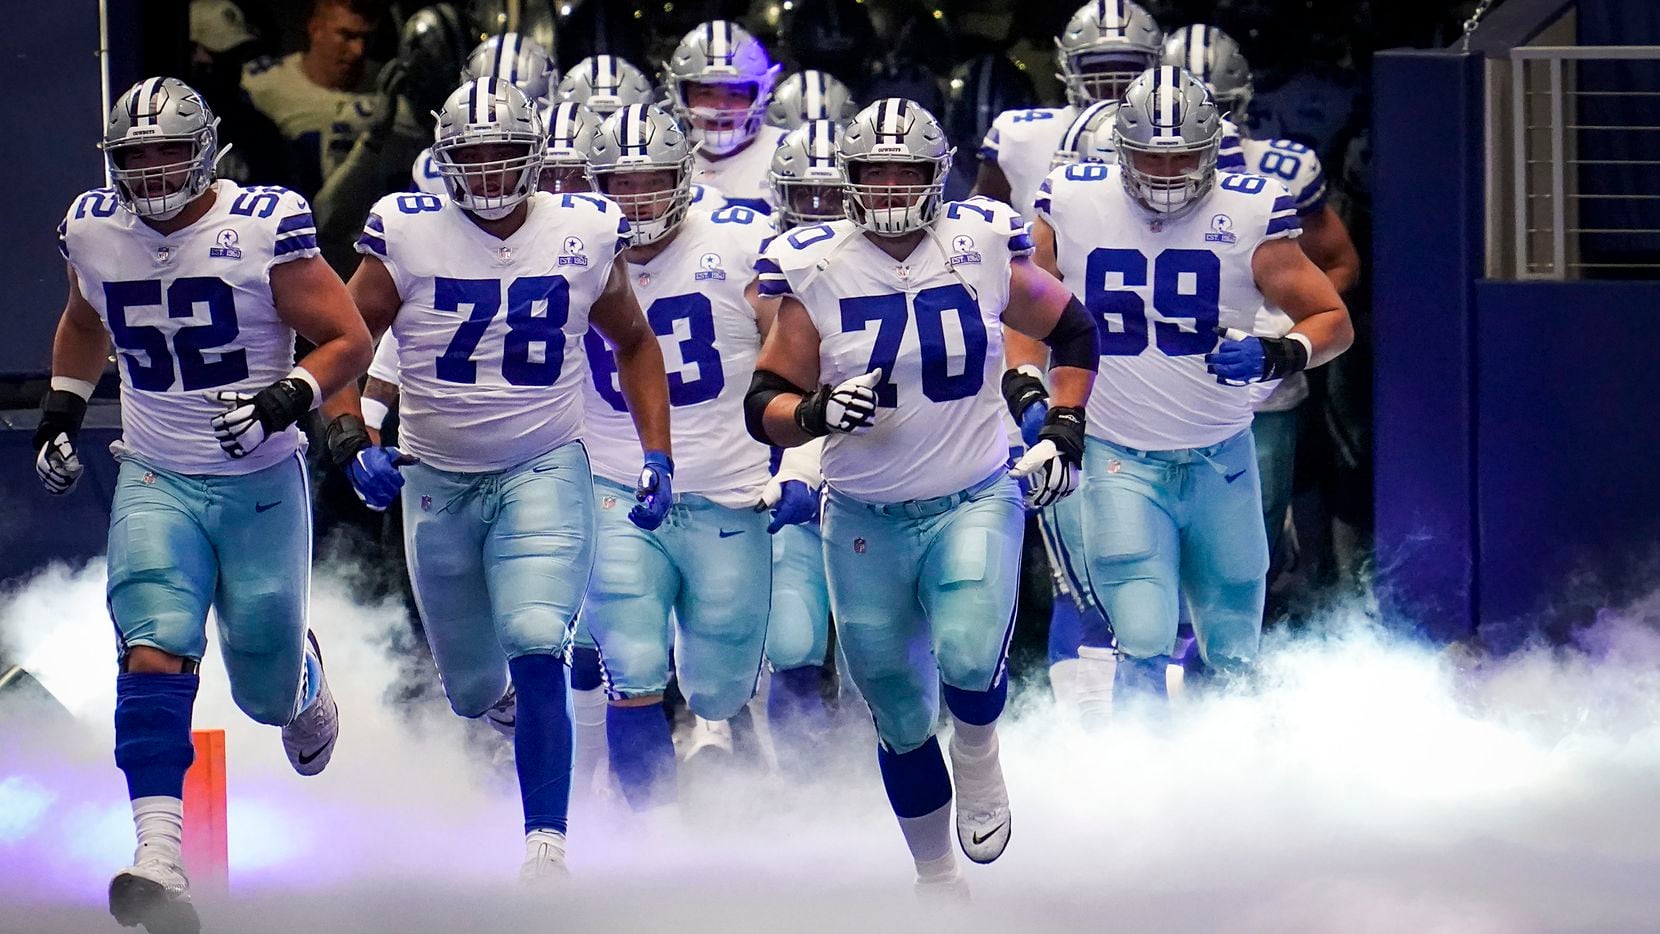 Dallas Cowboys offensive guard Zack Martin (70) leads the team onto the field to face the New York Giants in an NFL football game at AT&T Stadium on Sunday, Oct. 11, 2020, in Arlington.